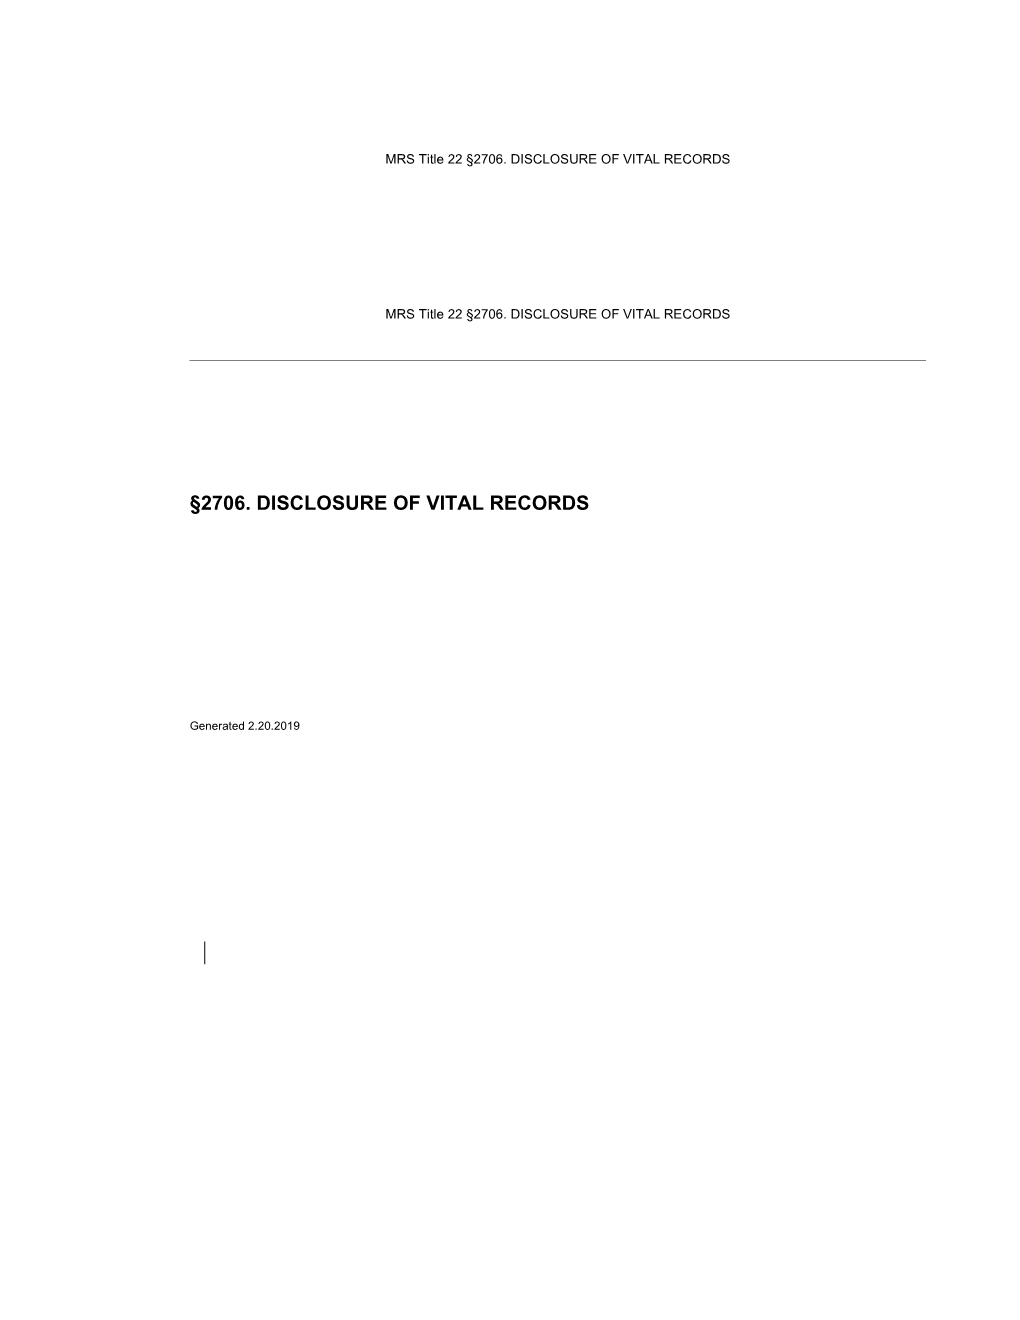 MRS Title 22 2706. DISCLOSURE of VITAL RECORDS